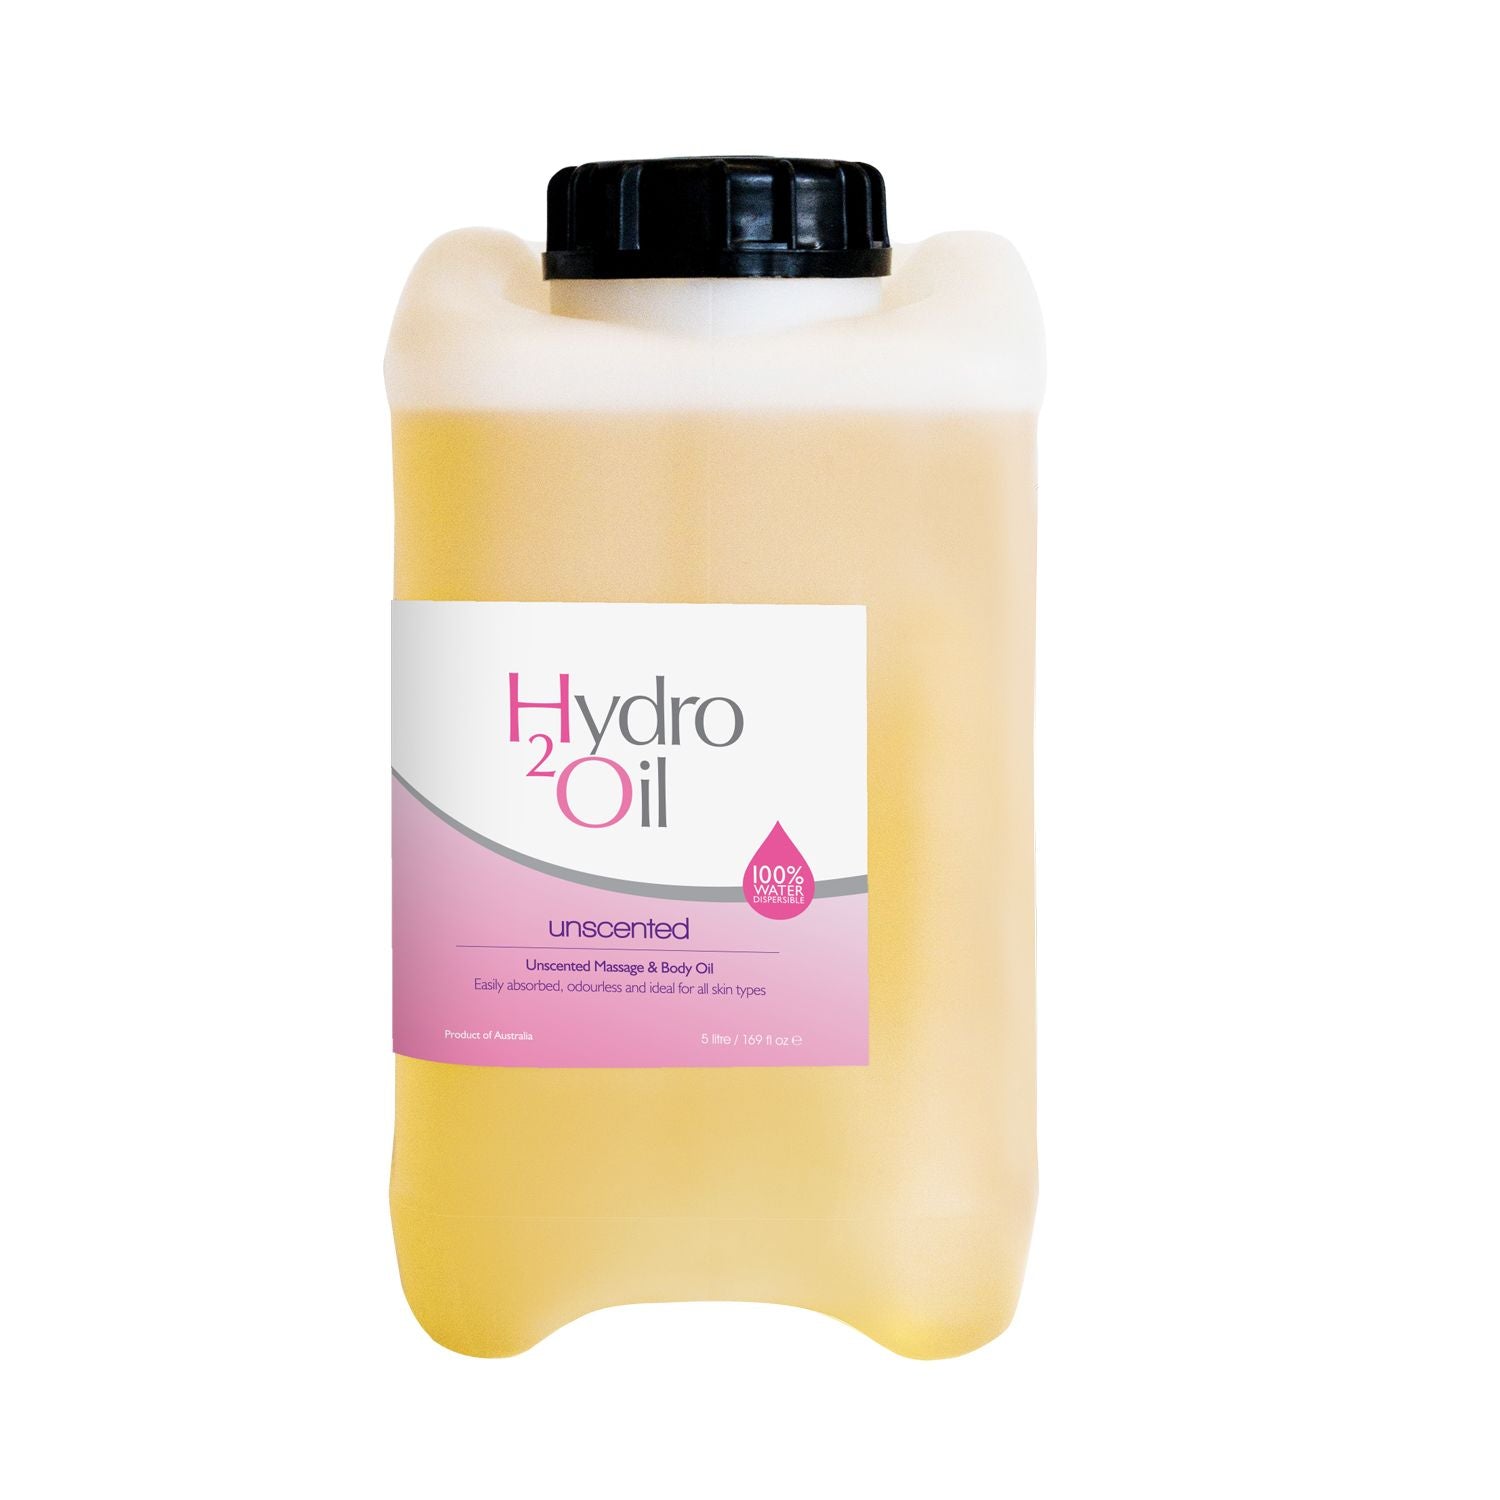 Hydro 2 Oil - Unscented - with pouring tap 5L